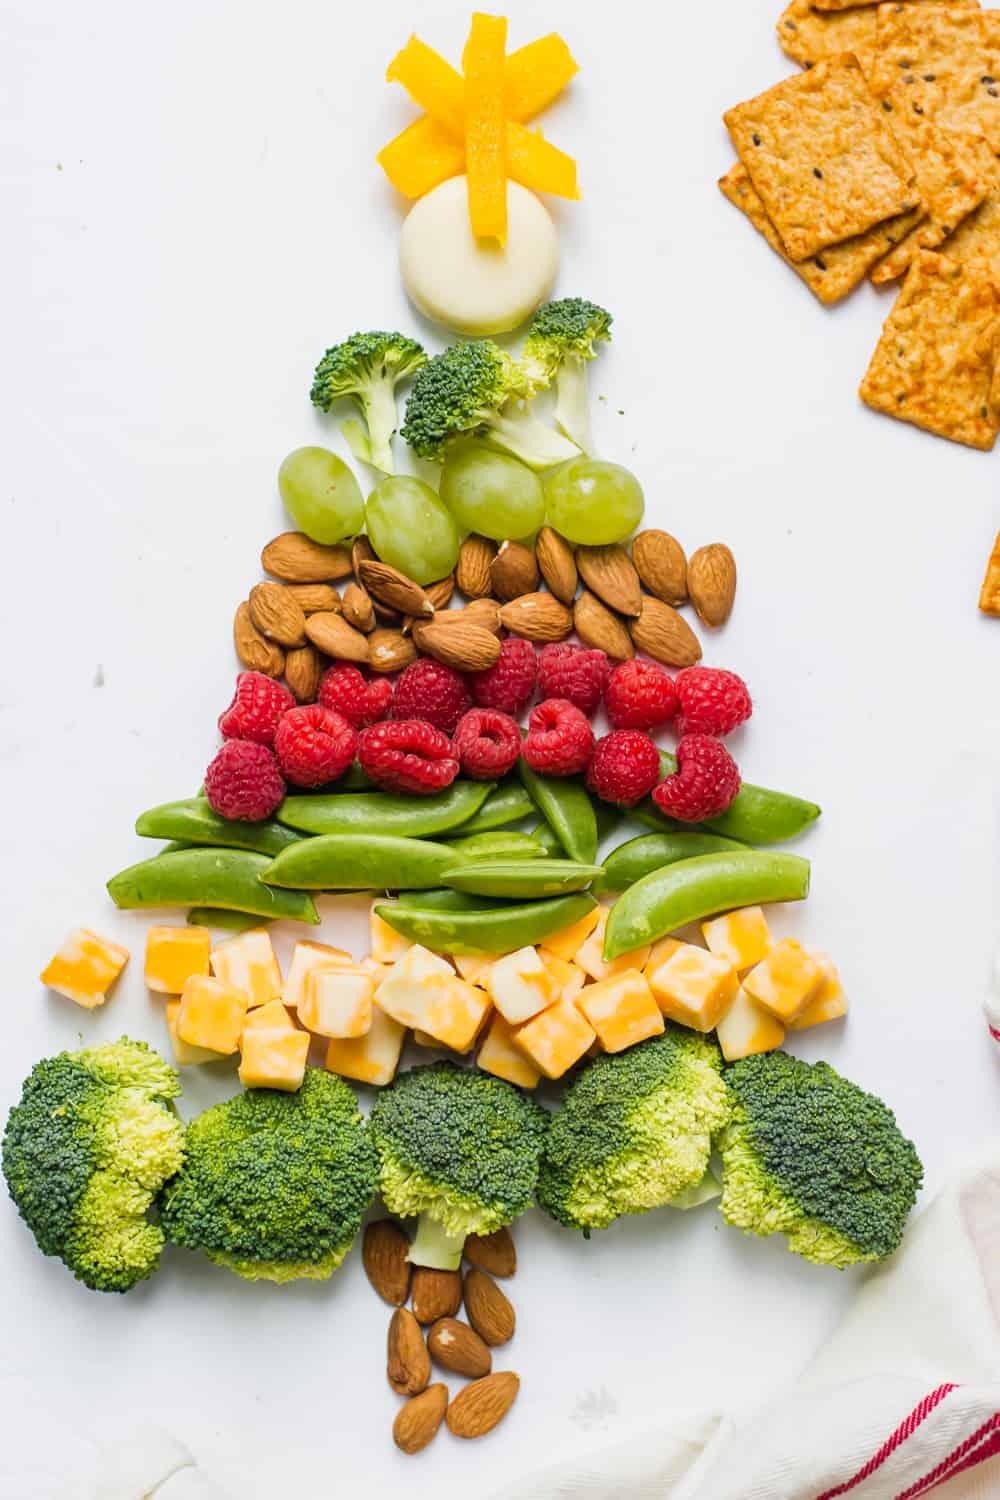 Broccoli, cheese, nuts, grapes, and berries in shape of Christmas tree